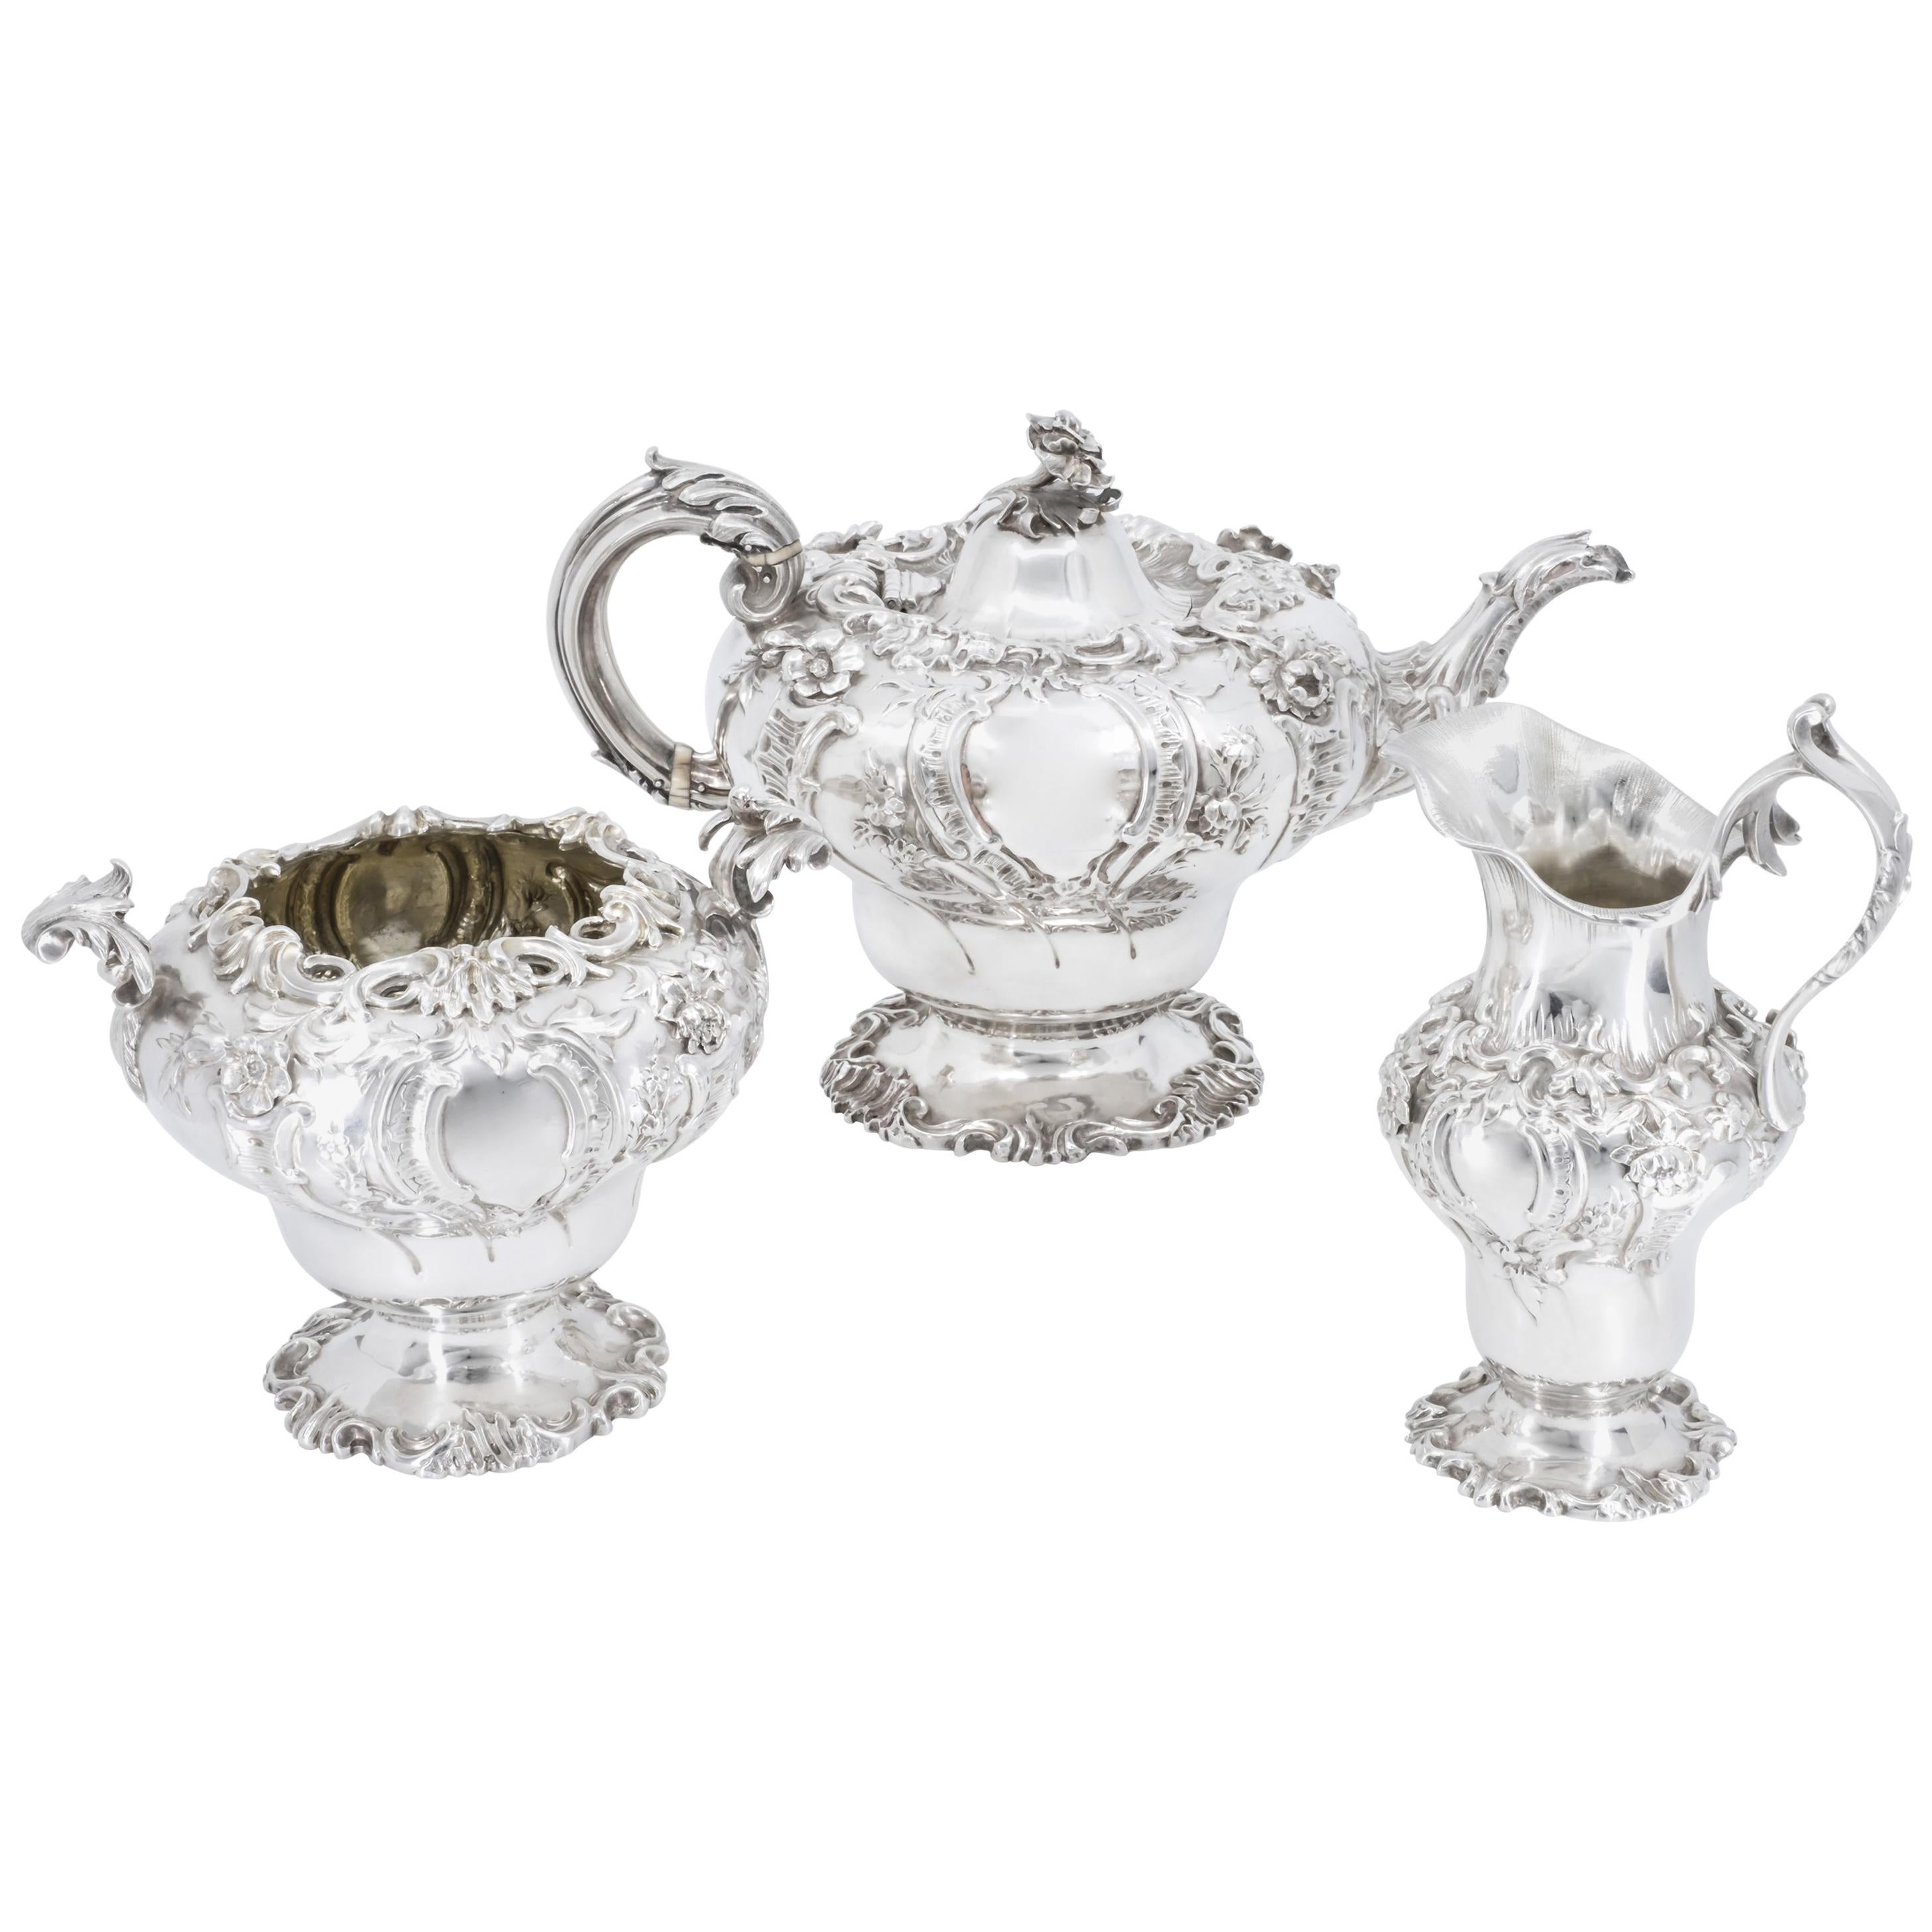 Tea Services in Rococo Style, London Sterling Sliver 925, Early 19th Century